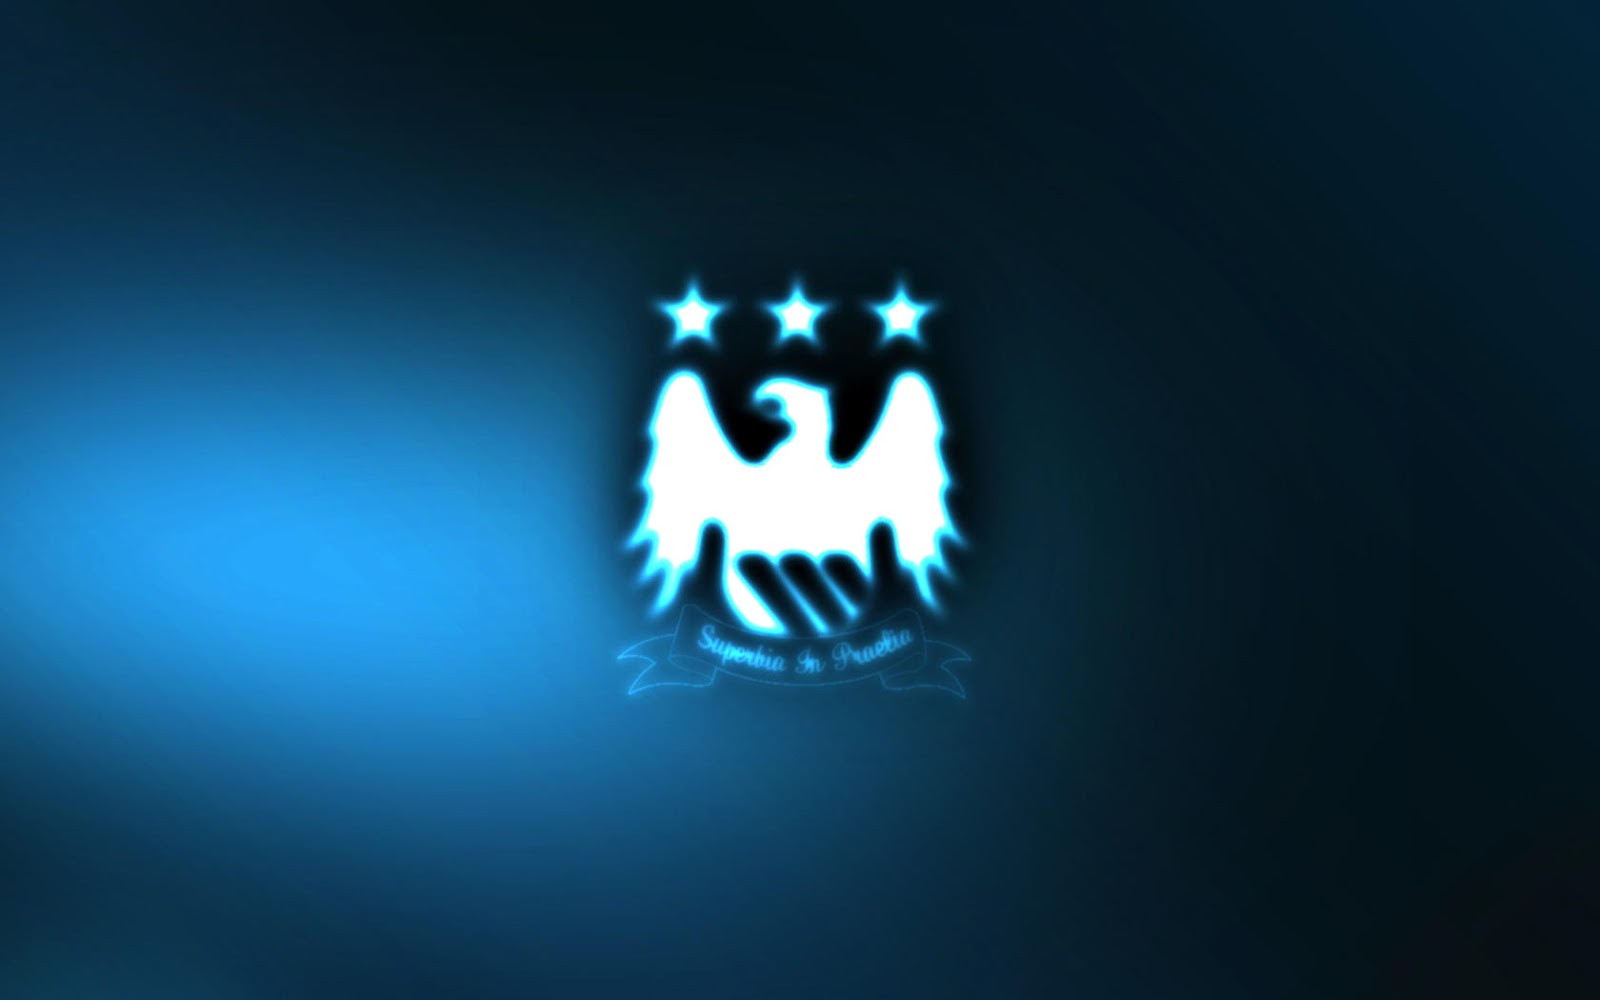 Manchester City Logo Wallpapers HD Collection Free Download